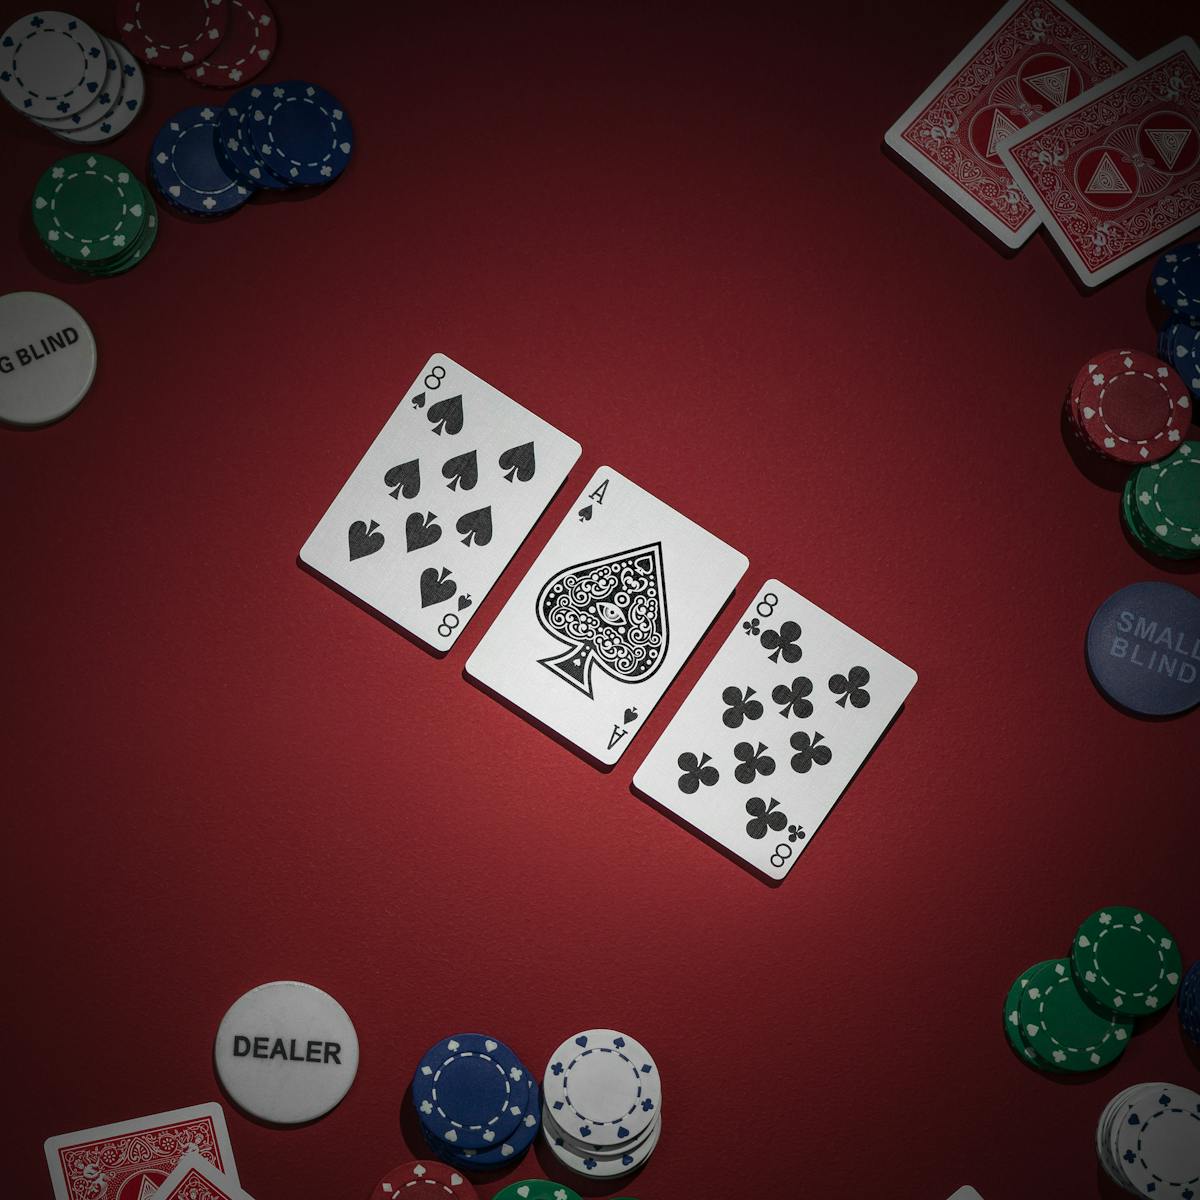 Photograph of a game of texas hold'em poker. Three cards reading eight of spades, ace of spades and eight of clubs have been dealt face up. To the side are four other hands of two cards which are hidden.  A pack of cards waiting to be dealt is visible in the bottom left of the frame.  Chips are present for each player, along with the dealer, big blind and small blind tokens.  The lighting is moody and picks out the upturned cards. The ace has been decorated with the eye of the illuminati.  The backs of the players cards also show the eye of the illuminati in a pyramid.